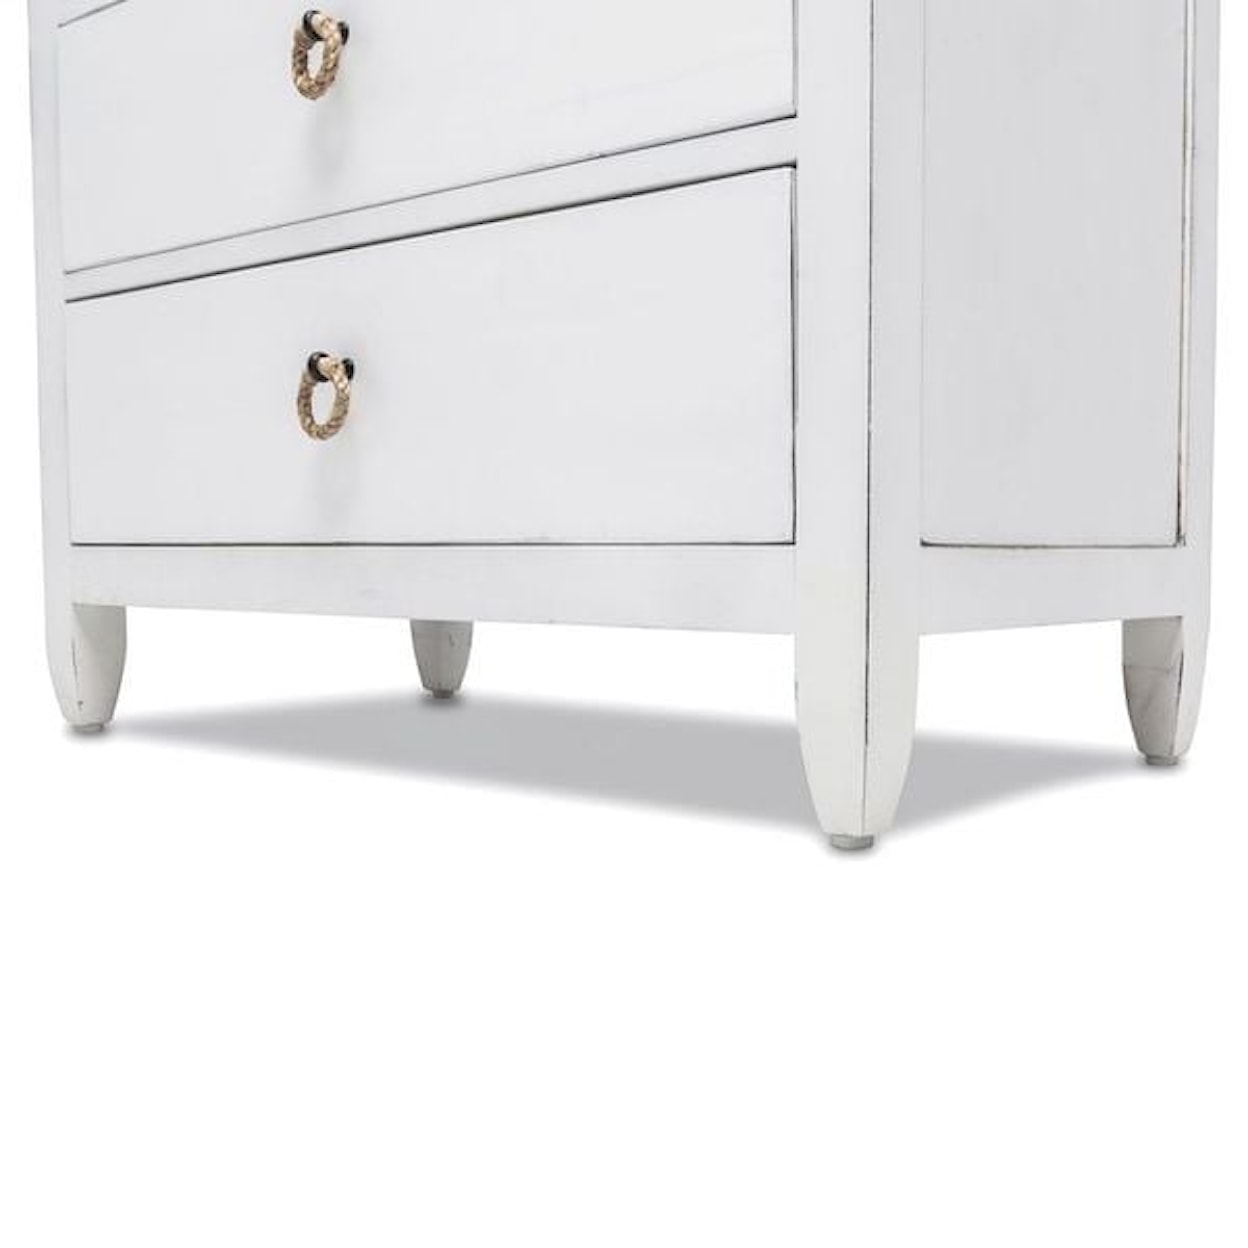 Sea Winds Trading Company Picket Fence Bedroom Collection Bedroom Drawer Chest